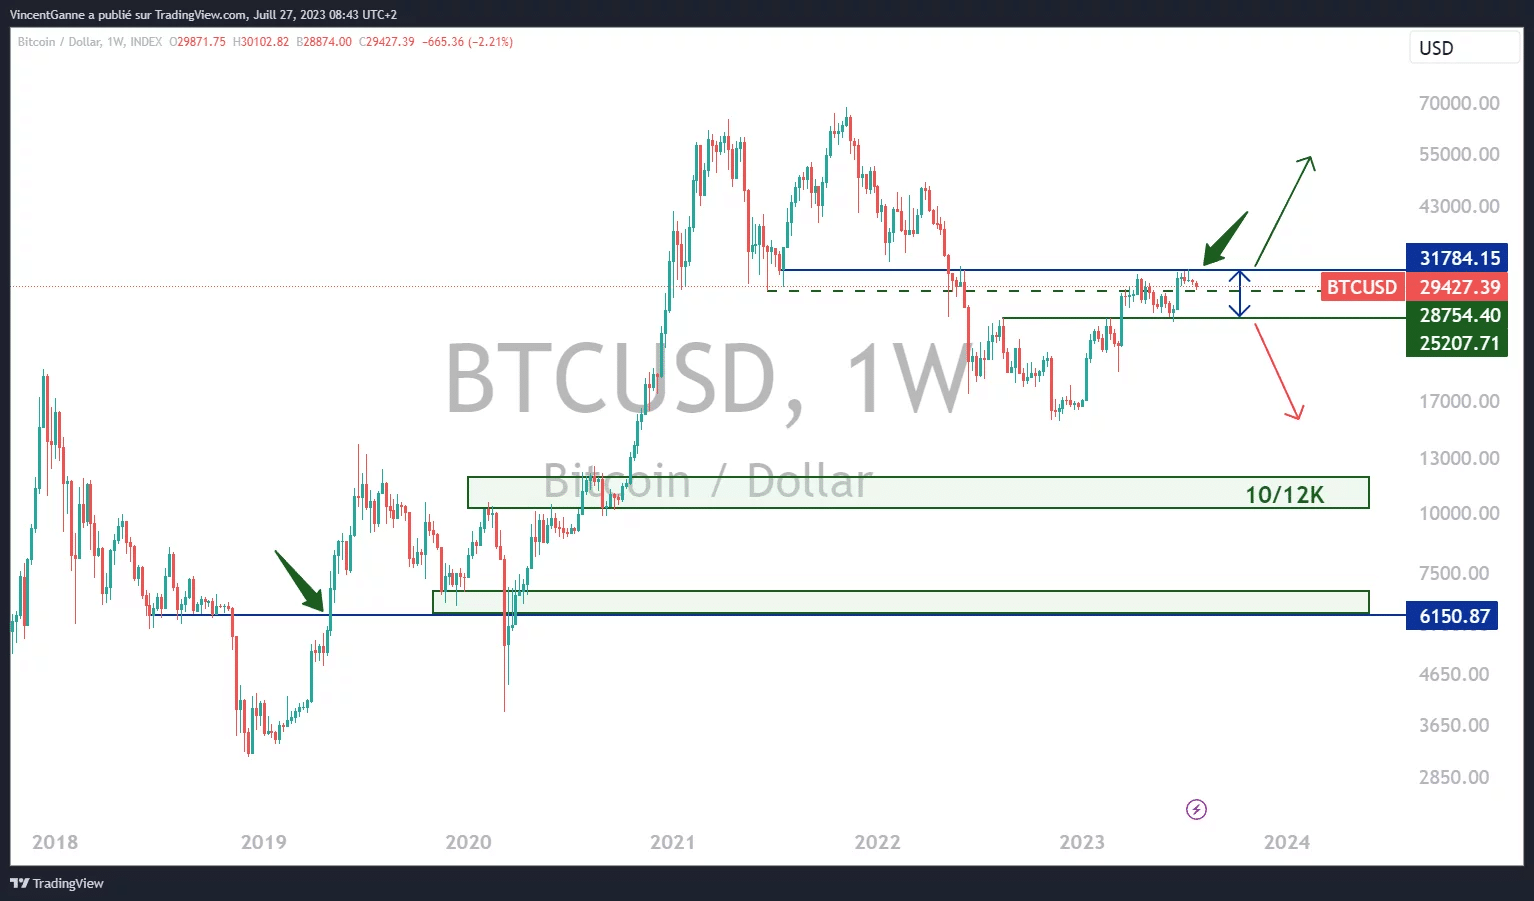 Chart created with the TradingView website and showing the weekly candlesticks of the bitcoin price